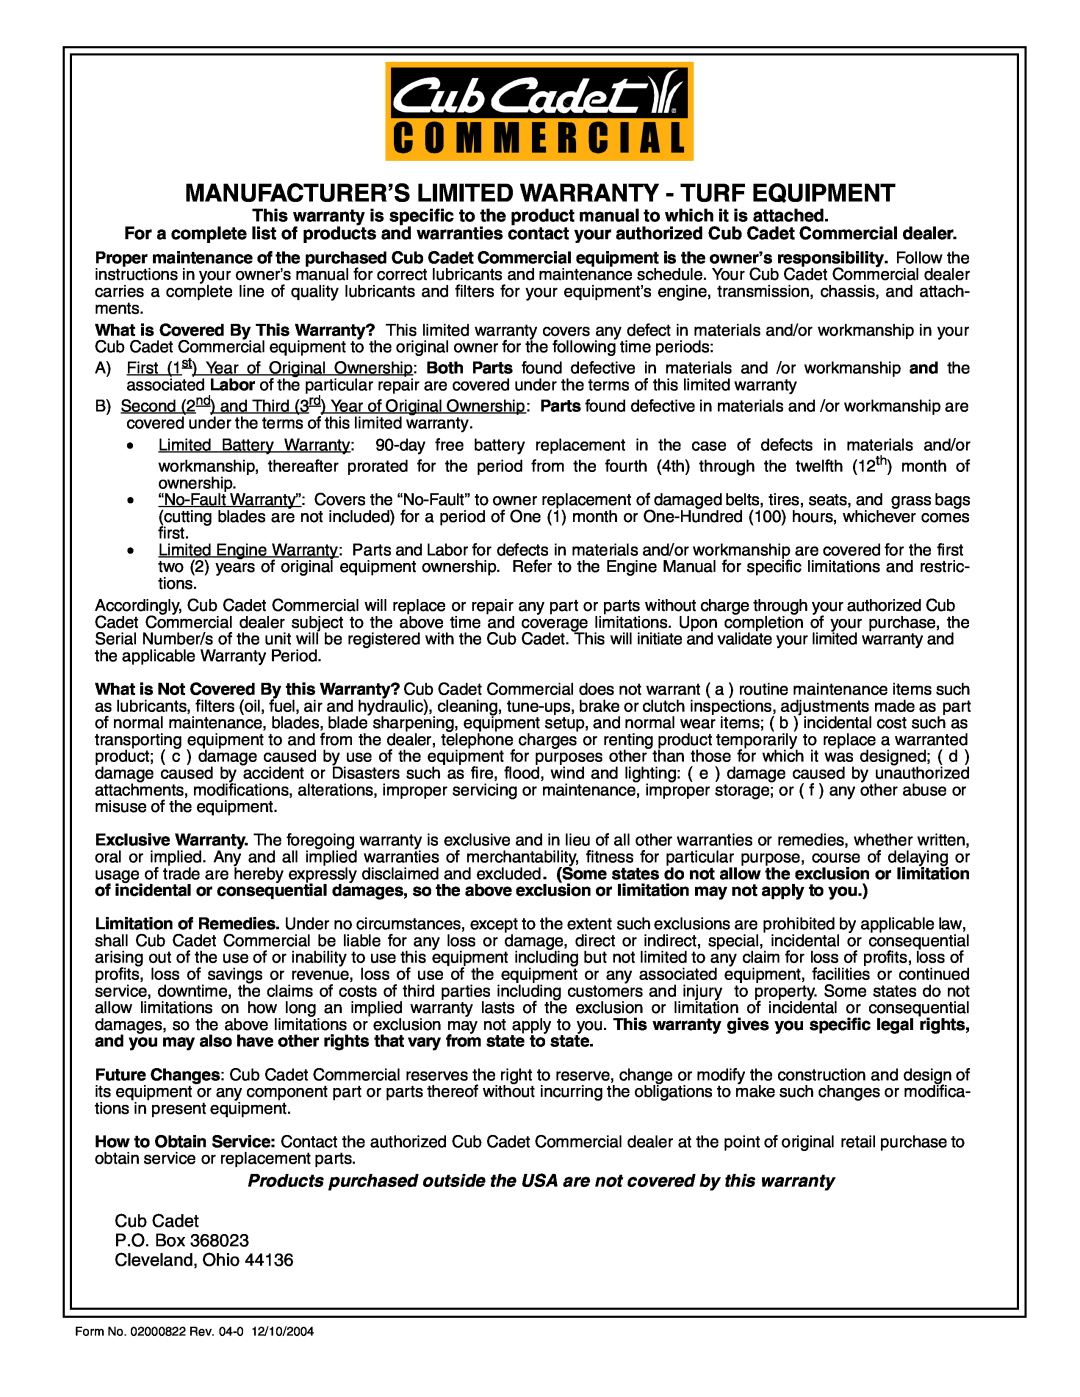 Cub Cadet Z - Wing 48 service manual Manufacturer’S Limited Warranty - Turf Equipment, Cub Cadet P.O. Box Cleveland, Ohio 